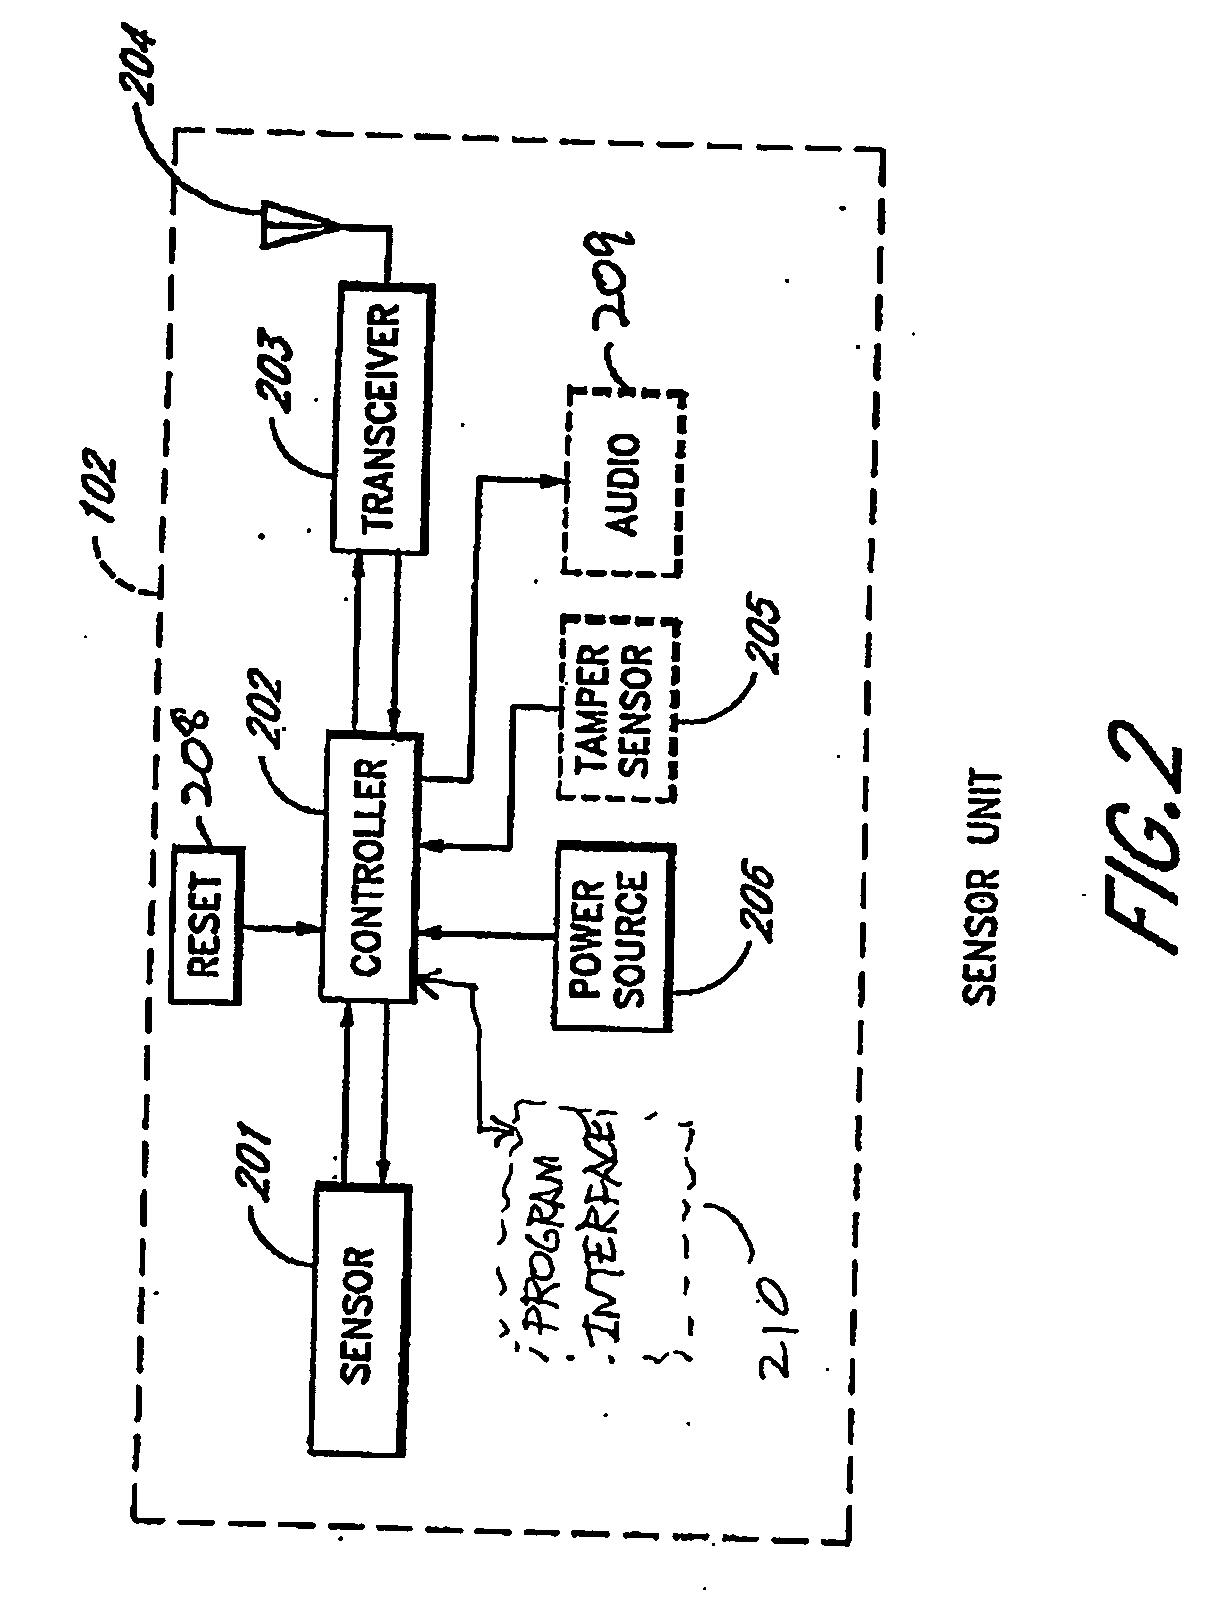 Method and apparatus for detecting severity of water leaks